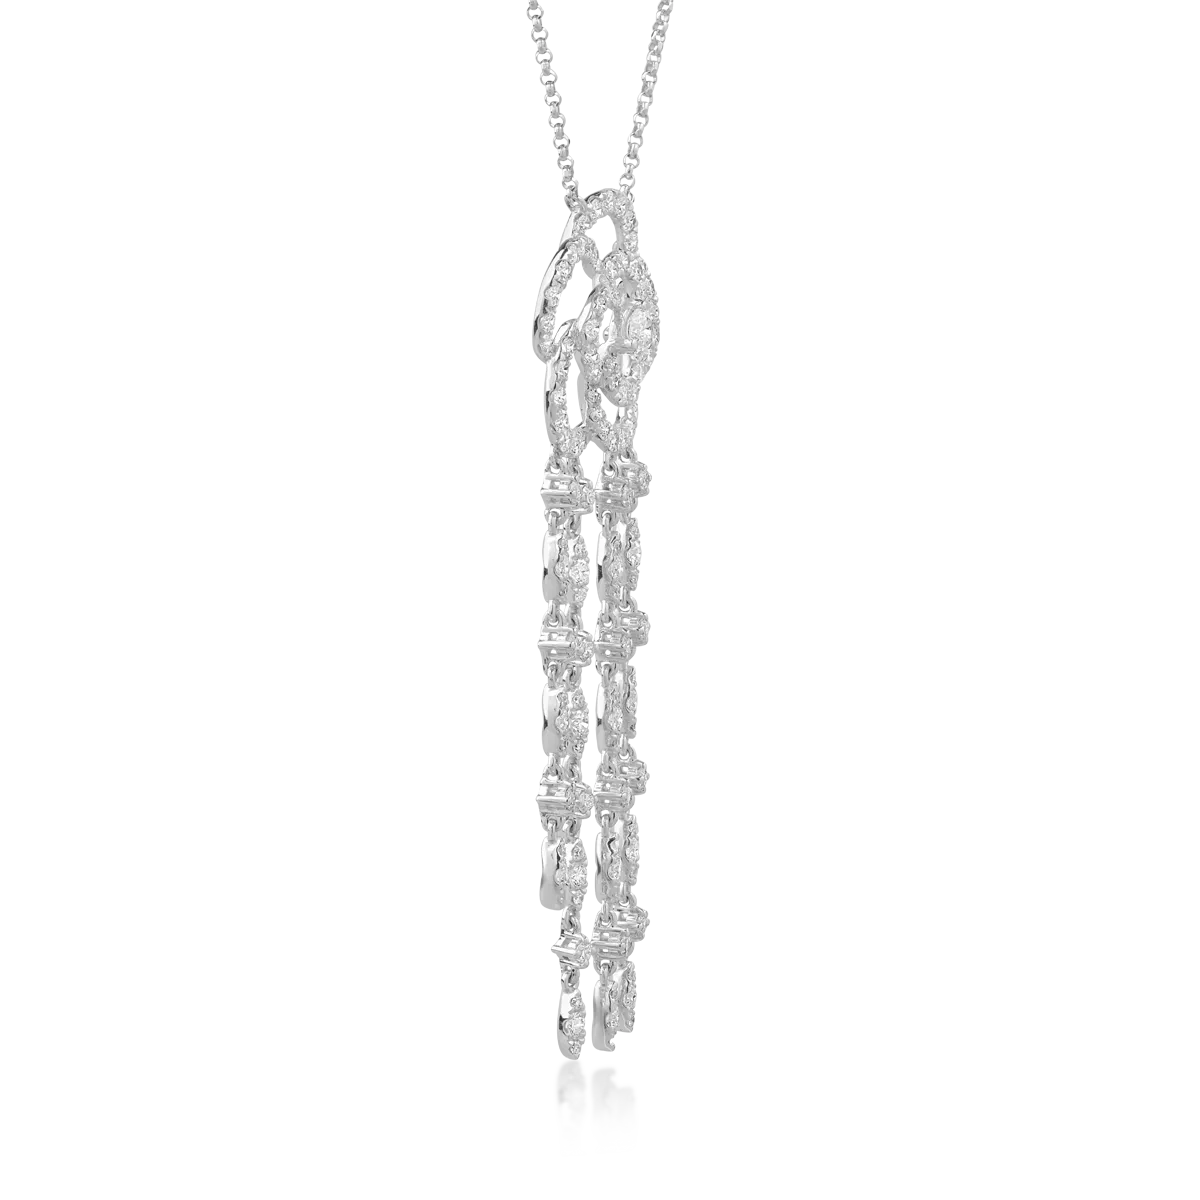 18K white gold pendant necklace with 1.71ct diamonds